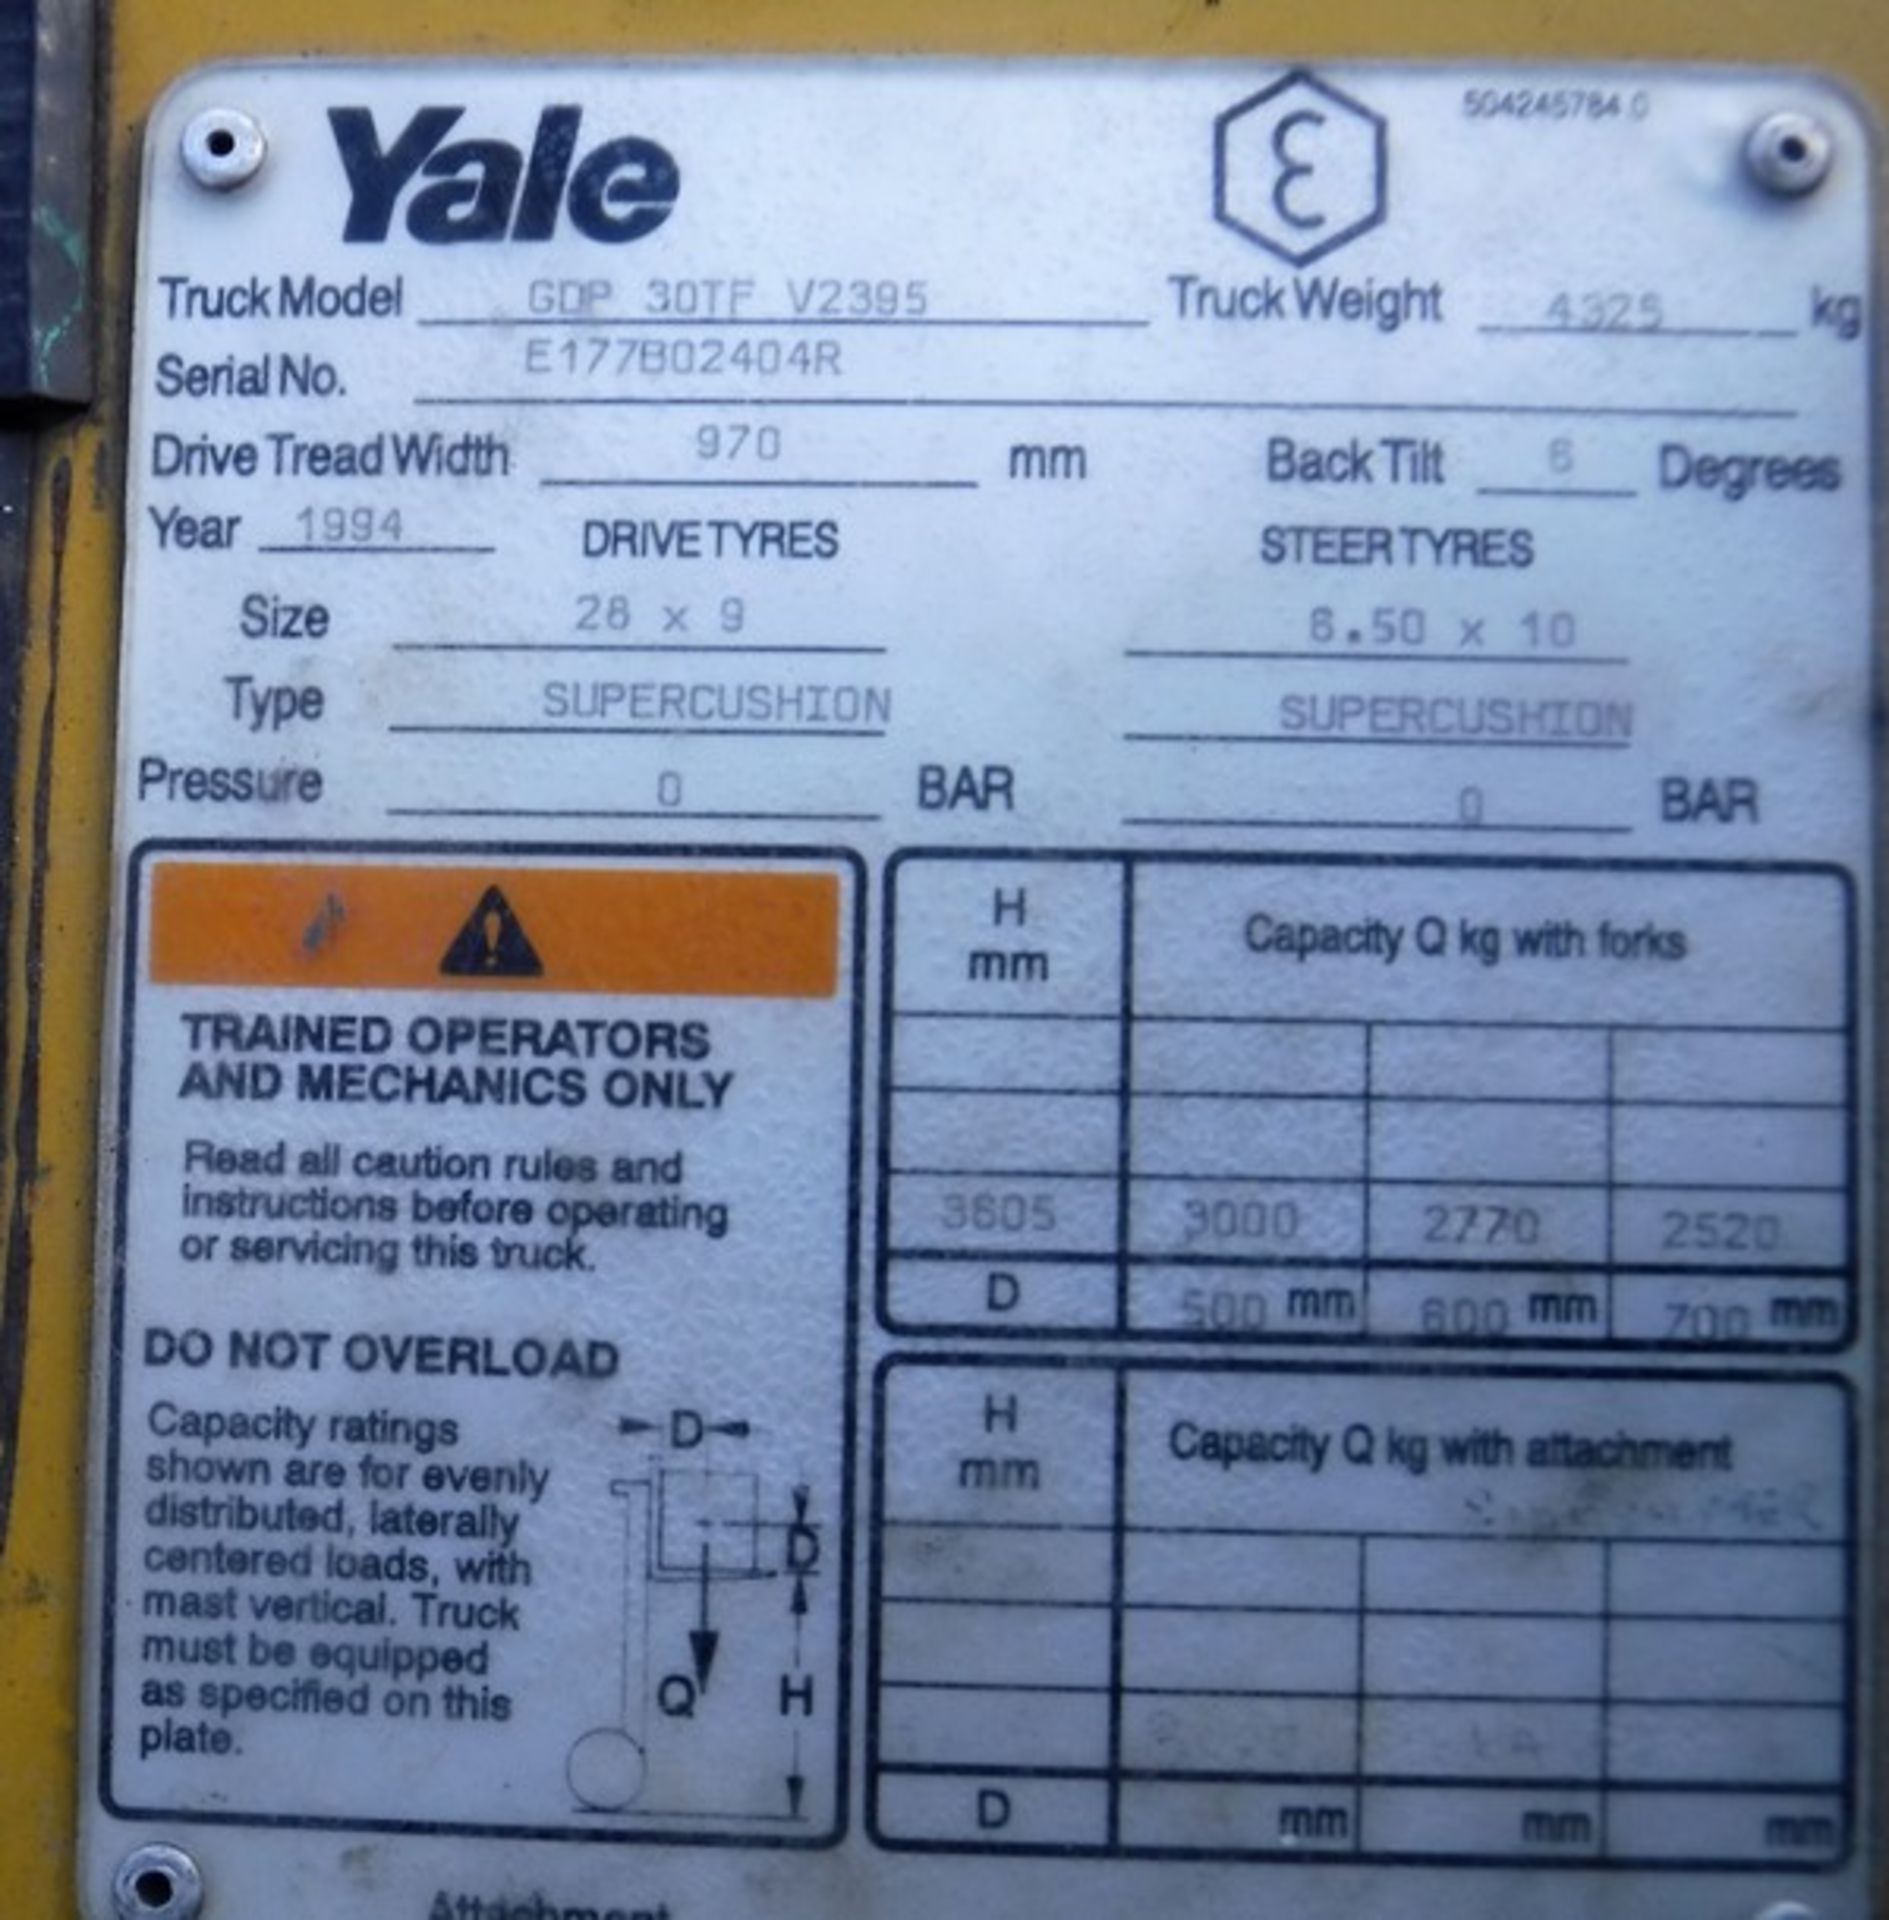 1994 YALE GDP30TFV2395 S/N E177B02404R. Asset No 727-9310 - Image 3 of 13